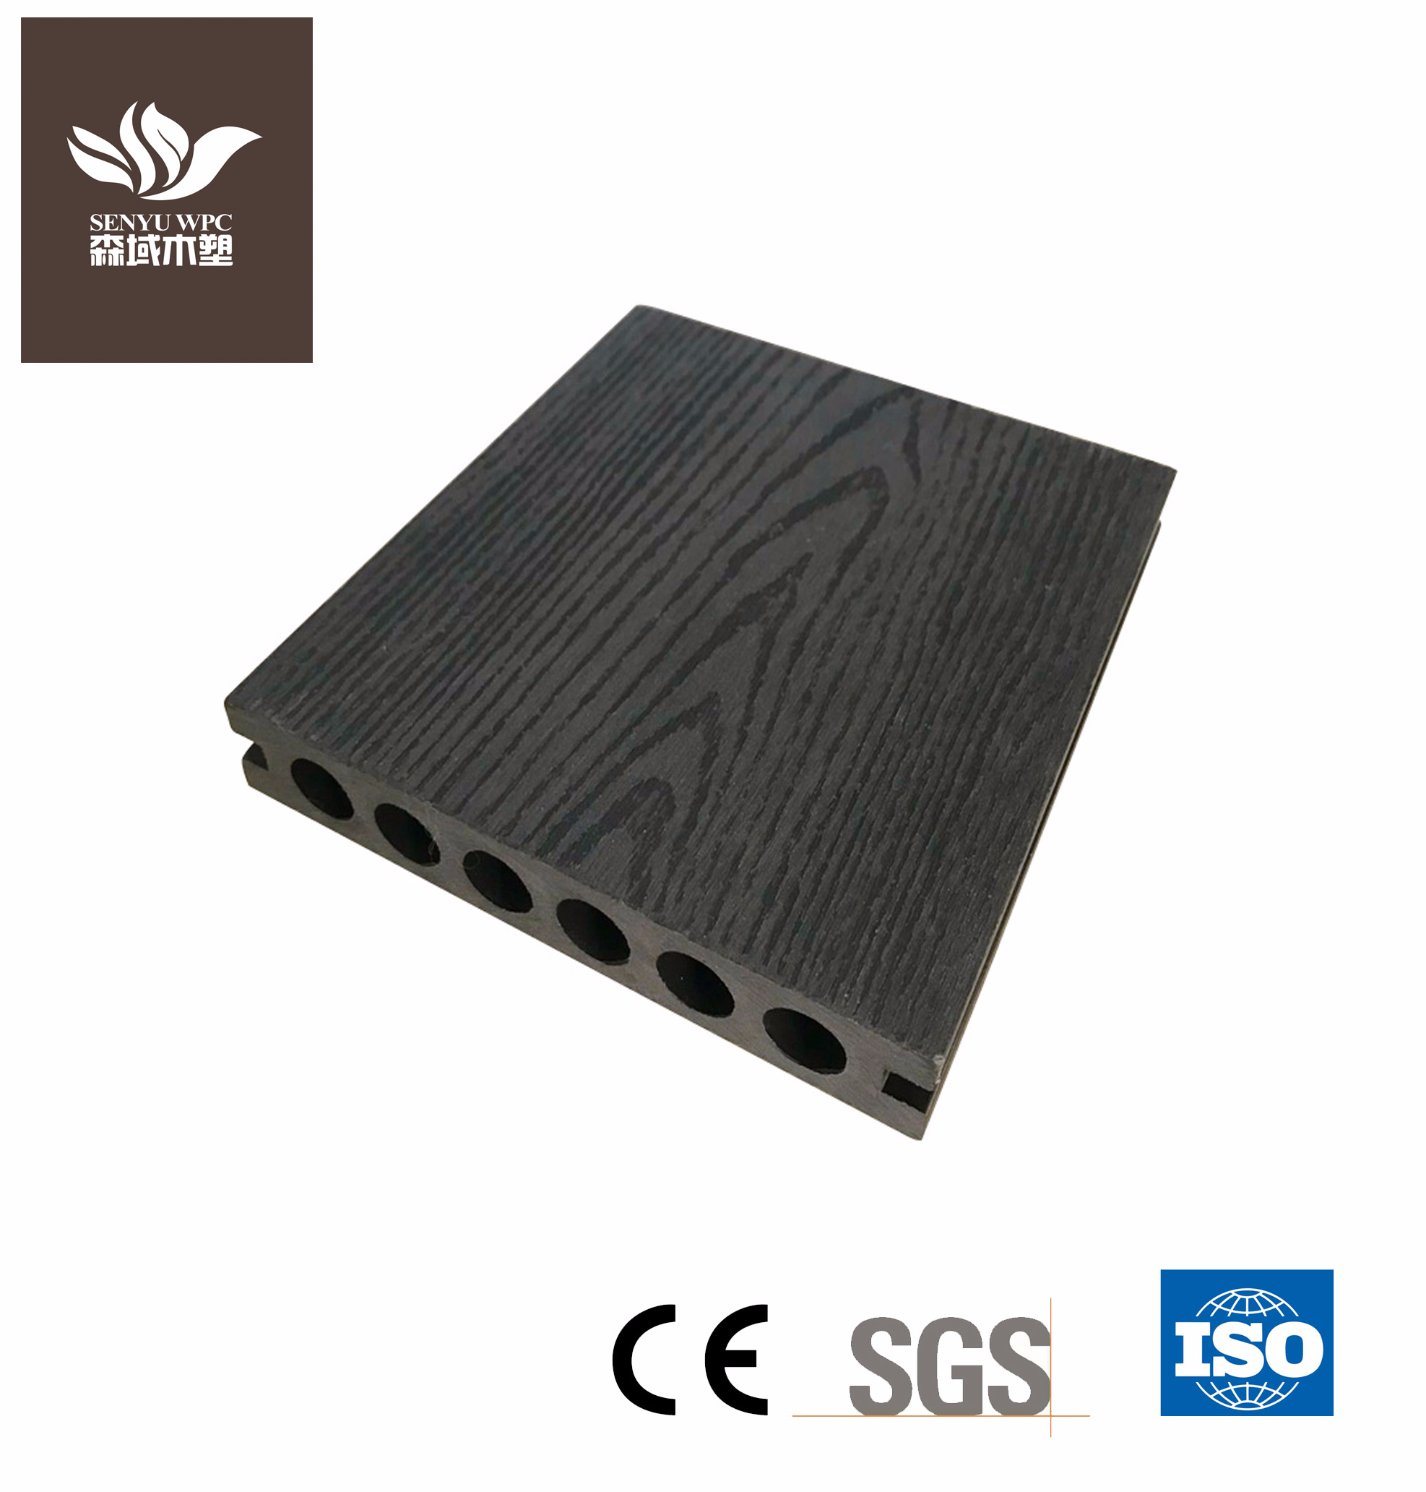 Outdoor Wood Plastic Composite WPC Decking for Flooring Board